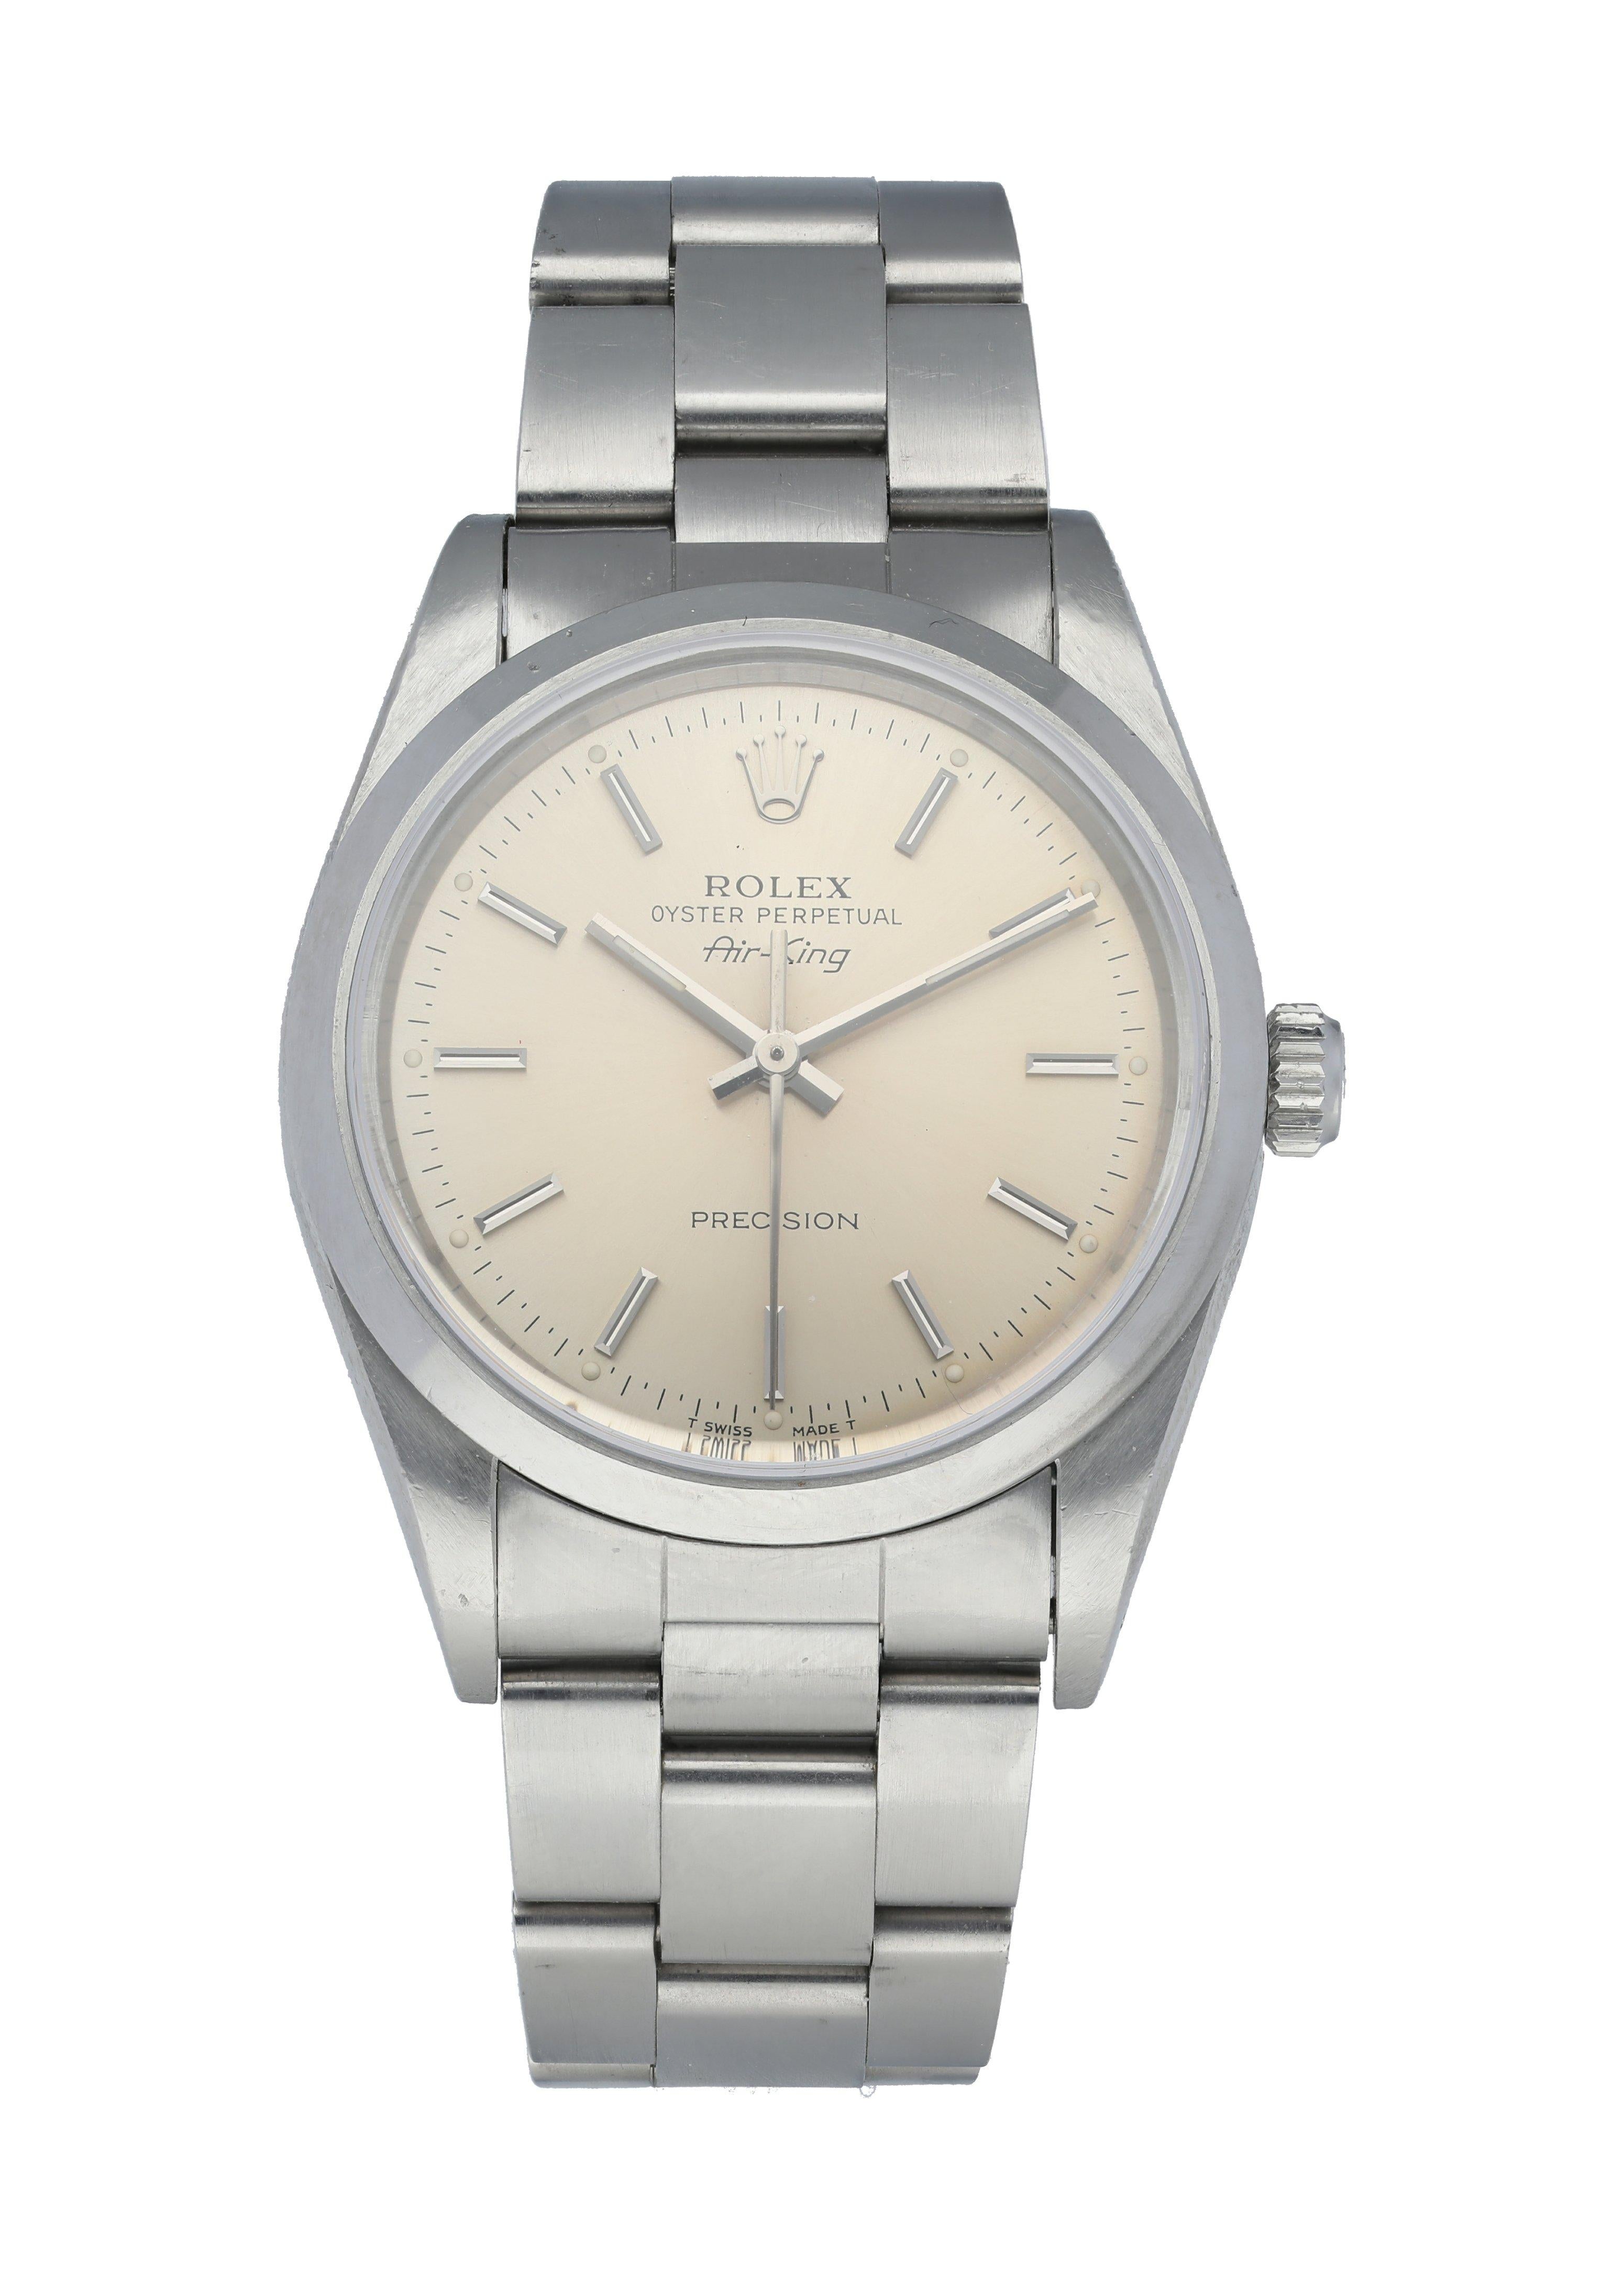 Rolex Air-King 14000 Men's Watch. 
34mm Stainless Steel case. 
Stainless Steel smooth bezel. 
Silver dial with steel hands and index hour markers. 
Minute markers on the outer dial. 
Stainless Steel Bracelet with Fold Over Clasp. 
Will fit up to a